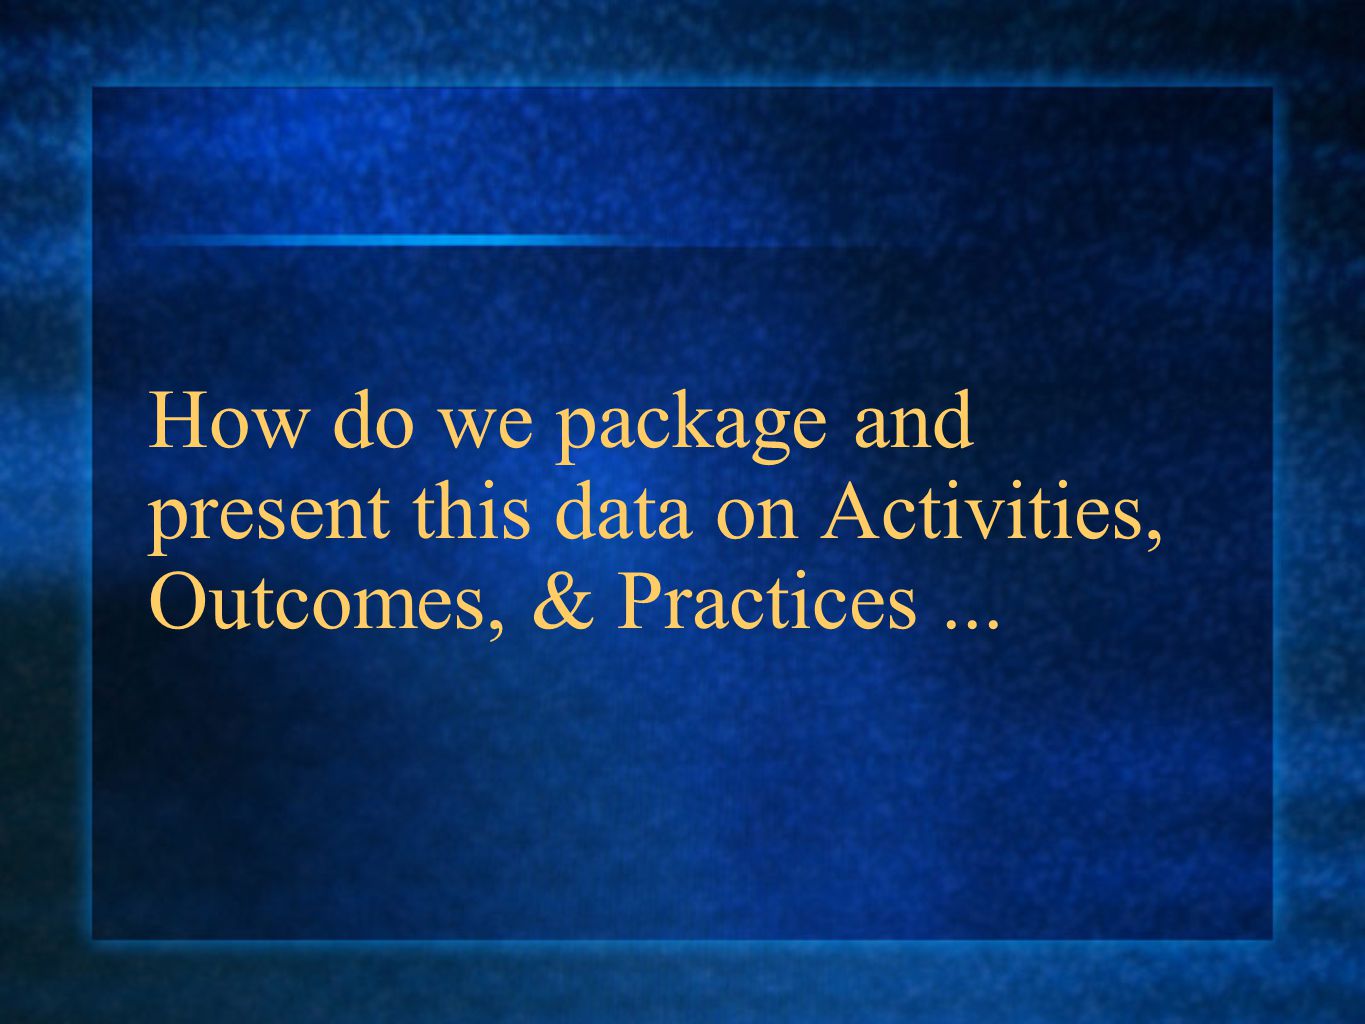 How do we package and present this data on Activities, Outcomes, & Practices...